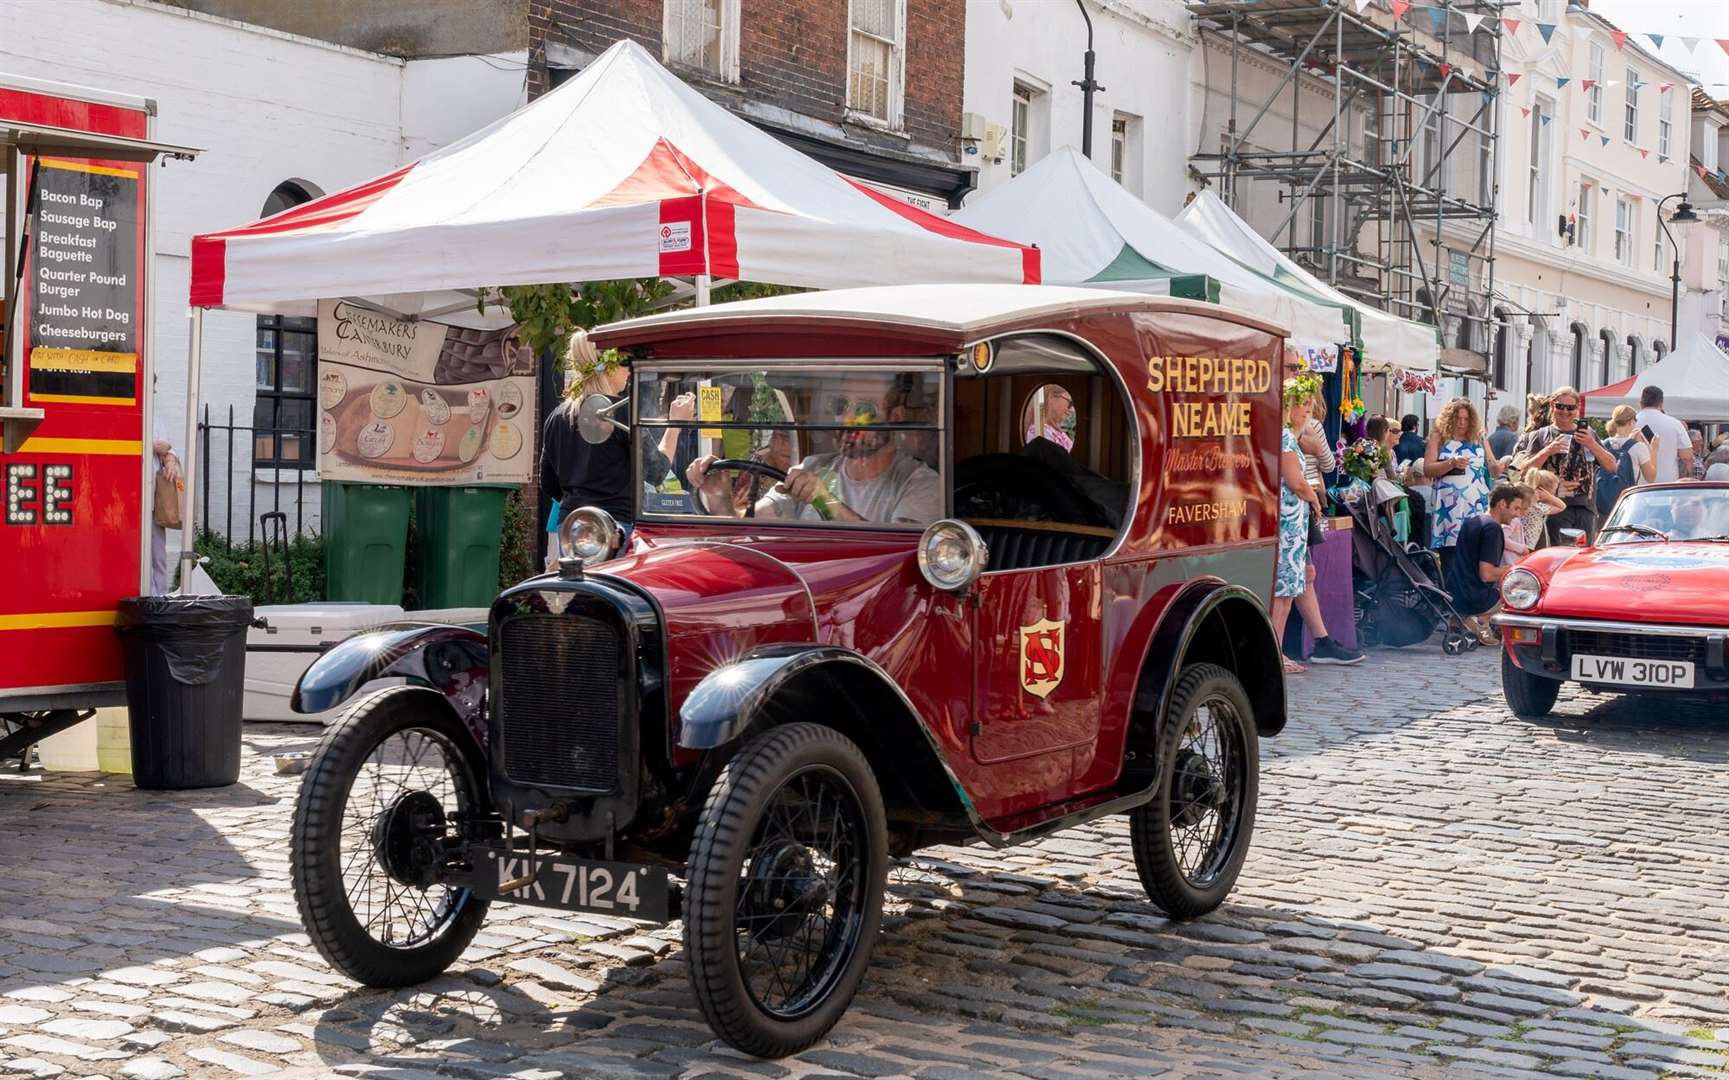 The weekend also boasts classic cars, Morris dancers, street food and a fairground. Picture: Shepherd Neame